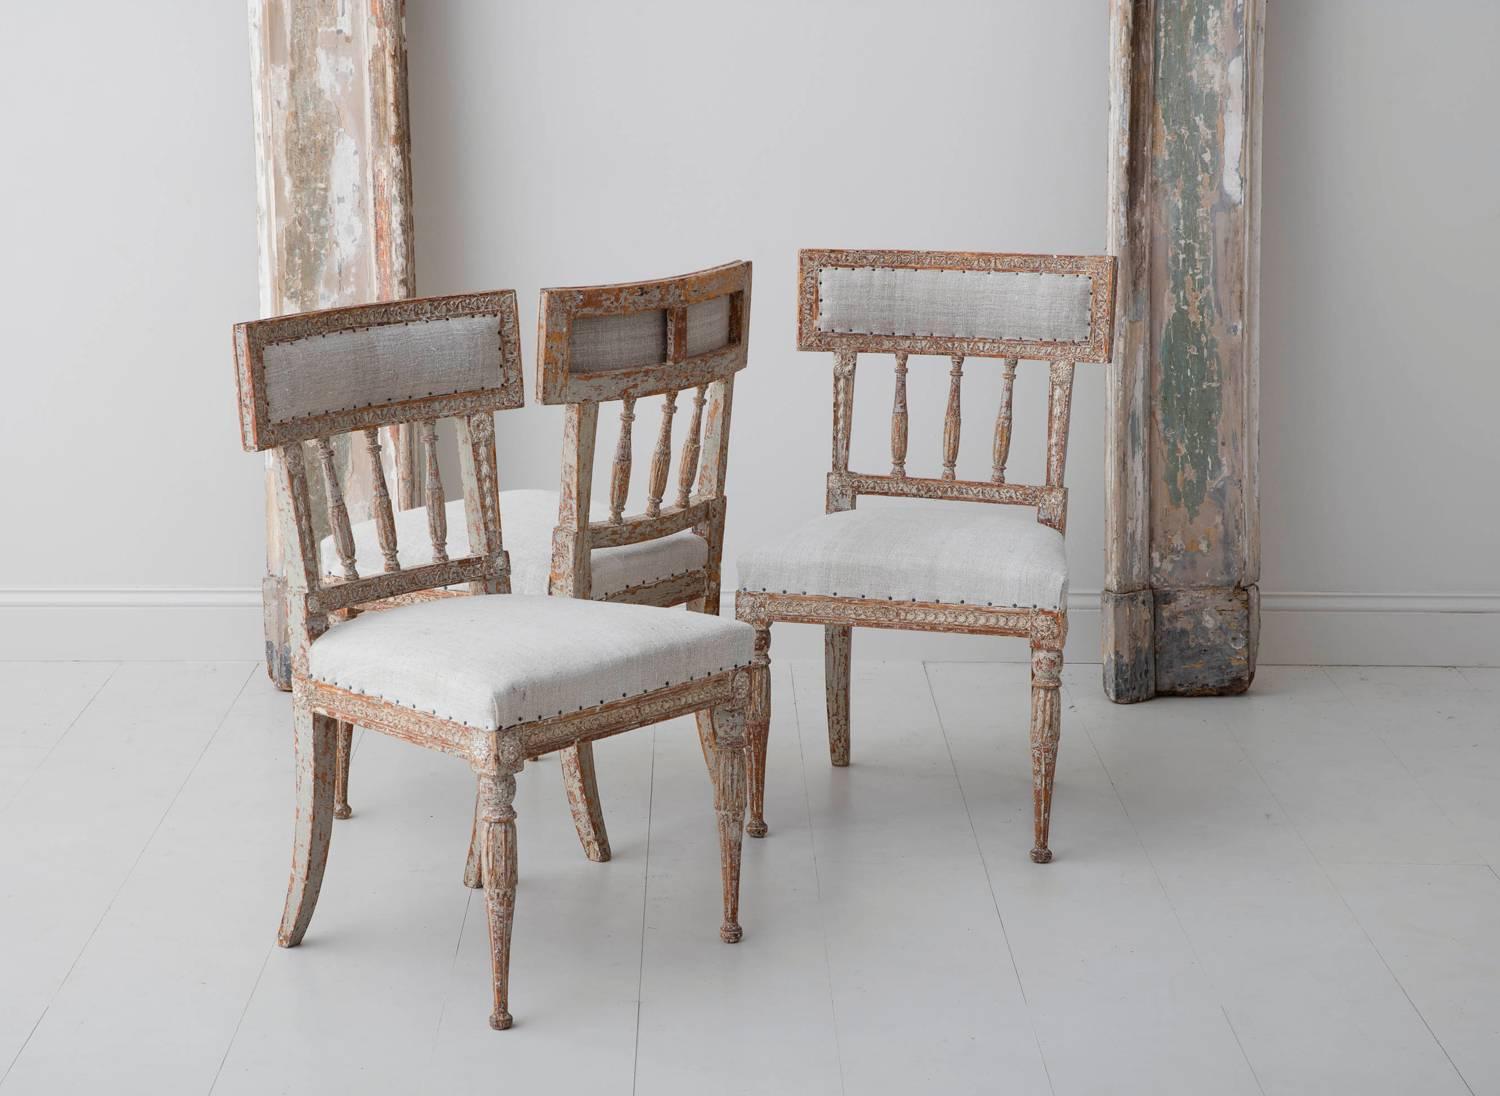 A set of six Swedish chairs from the Gustavian period in original ivory / taupe / gray paint, newly upholstered in antique linen. These beautiful chairs have curved splat backs, inspired by antique Roman 